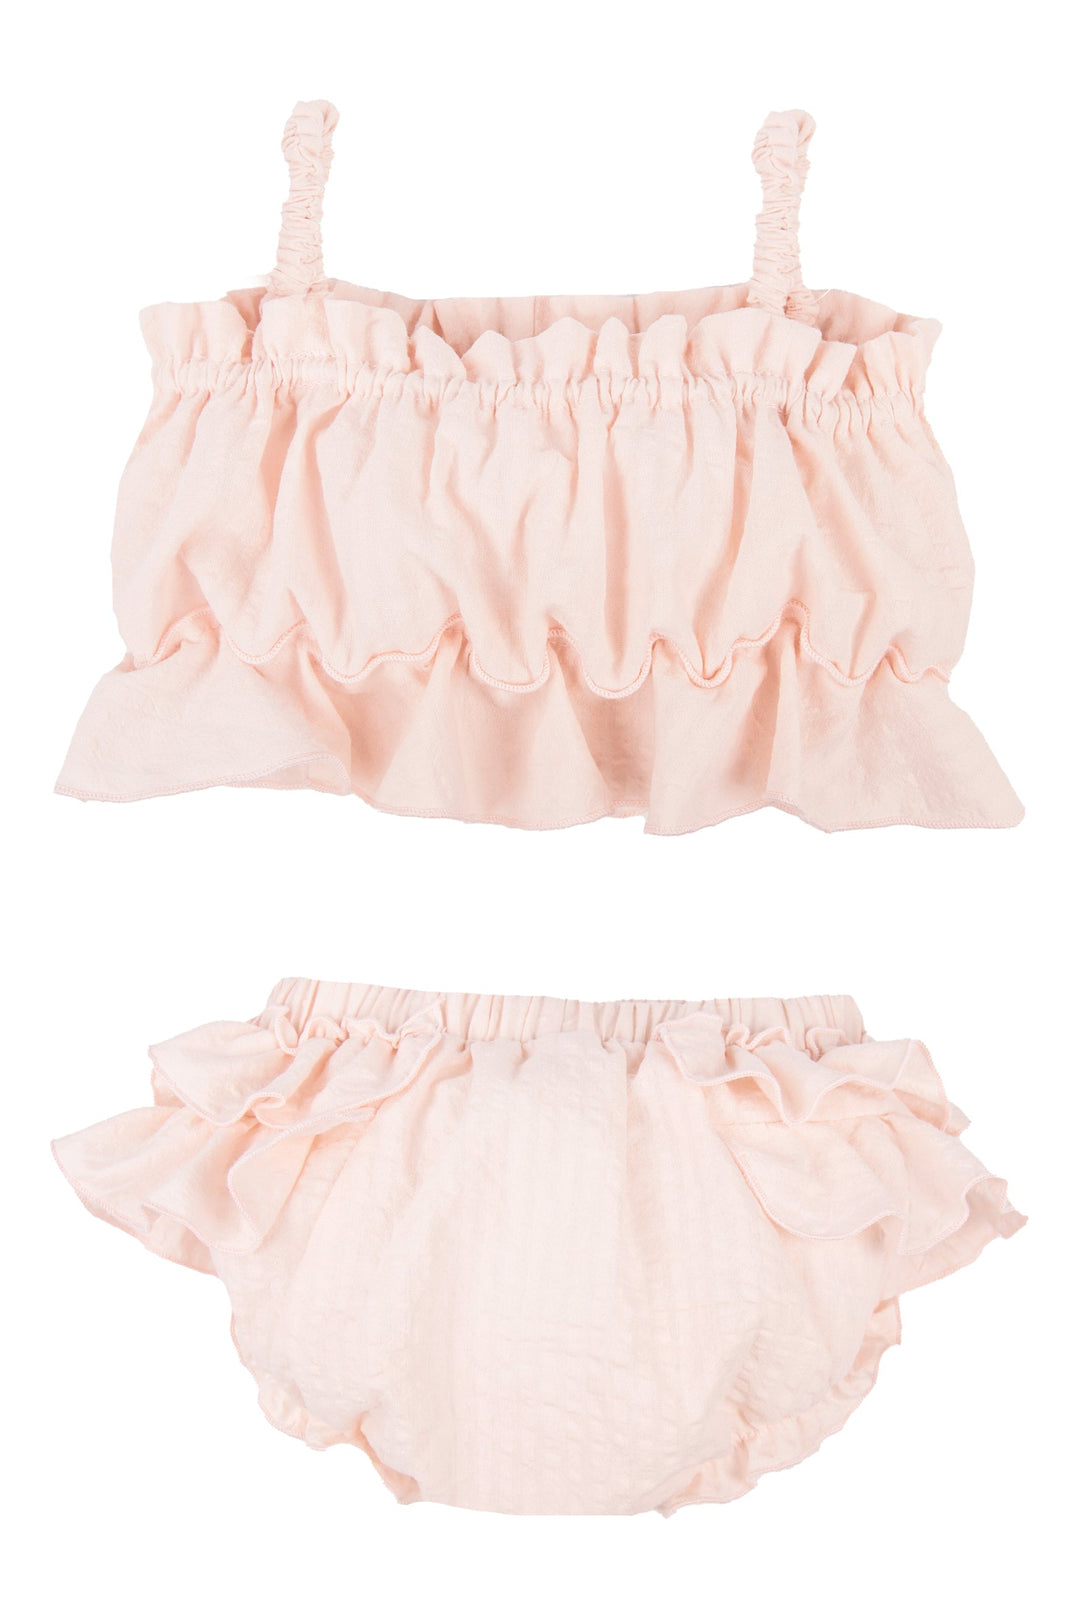 Jamiks "Miki" Apricot Cheesecloth Top & Bloomers | iphoneandroidapplications